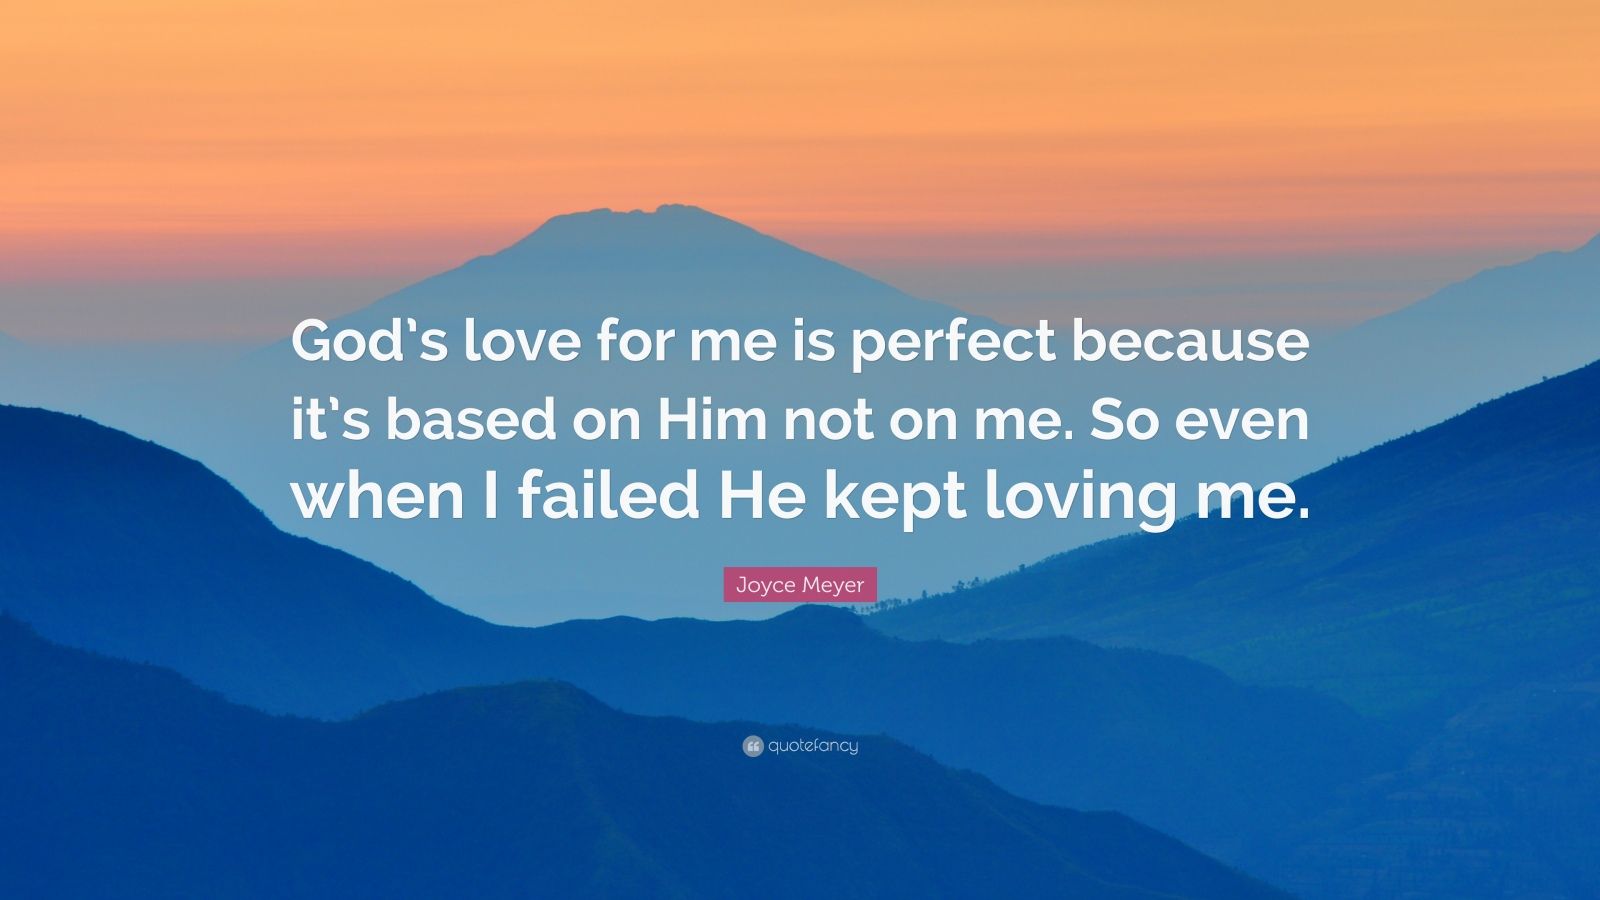 Joyce Meyer Quote “God s love for me is perfect because it s based on Him